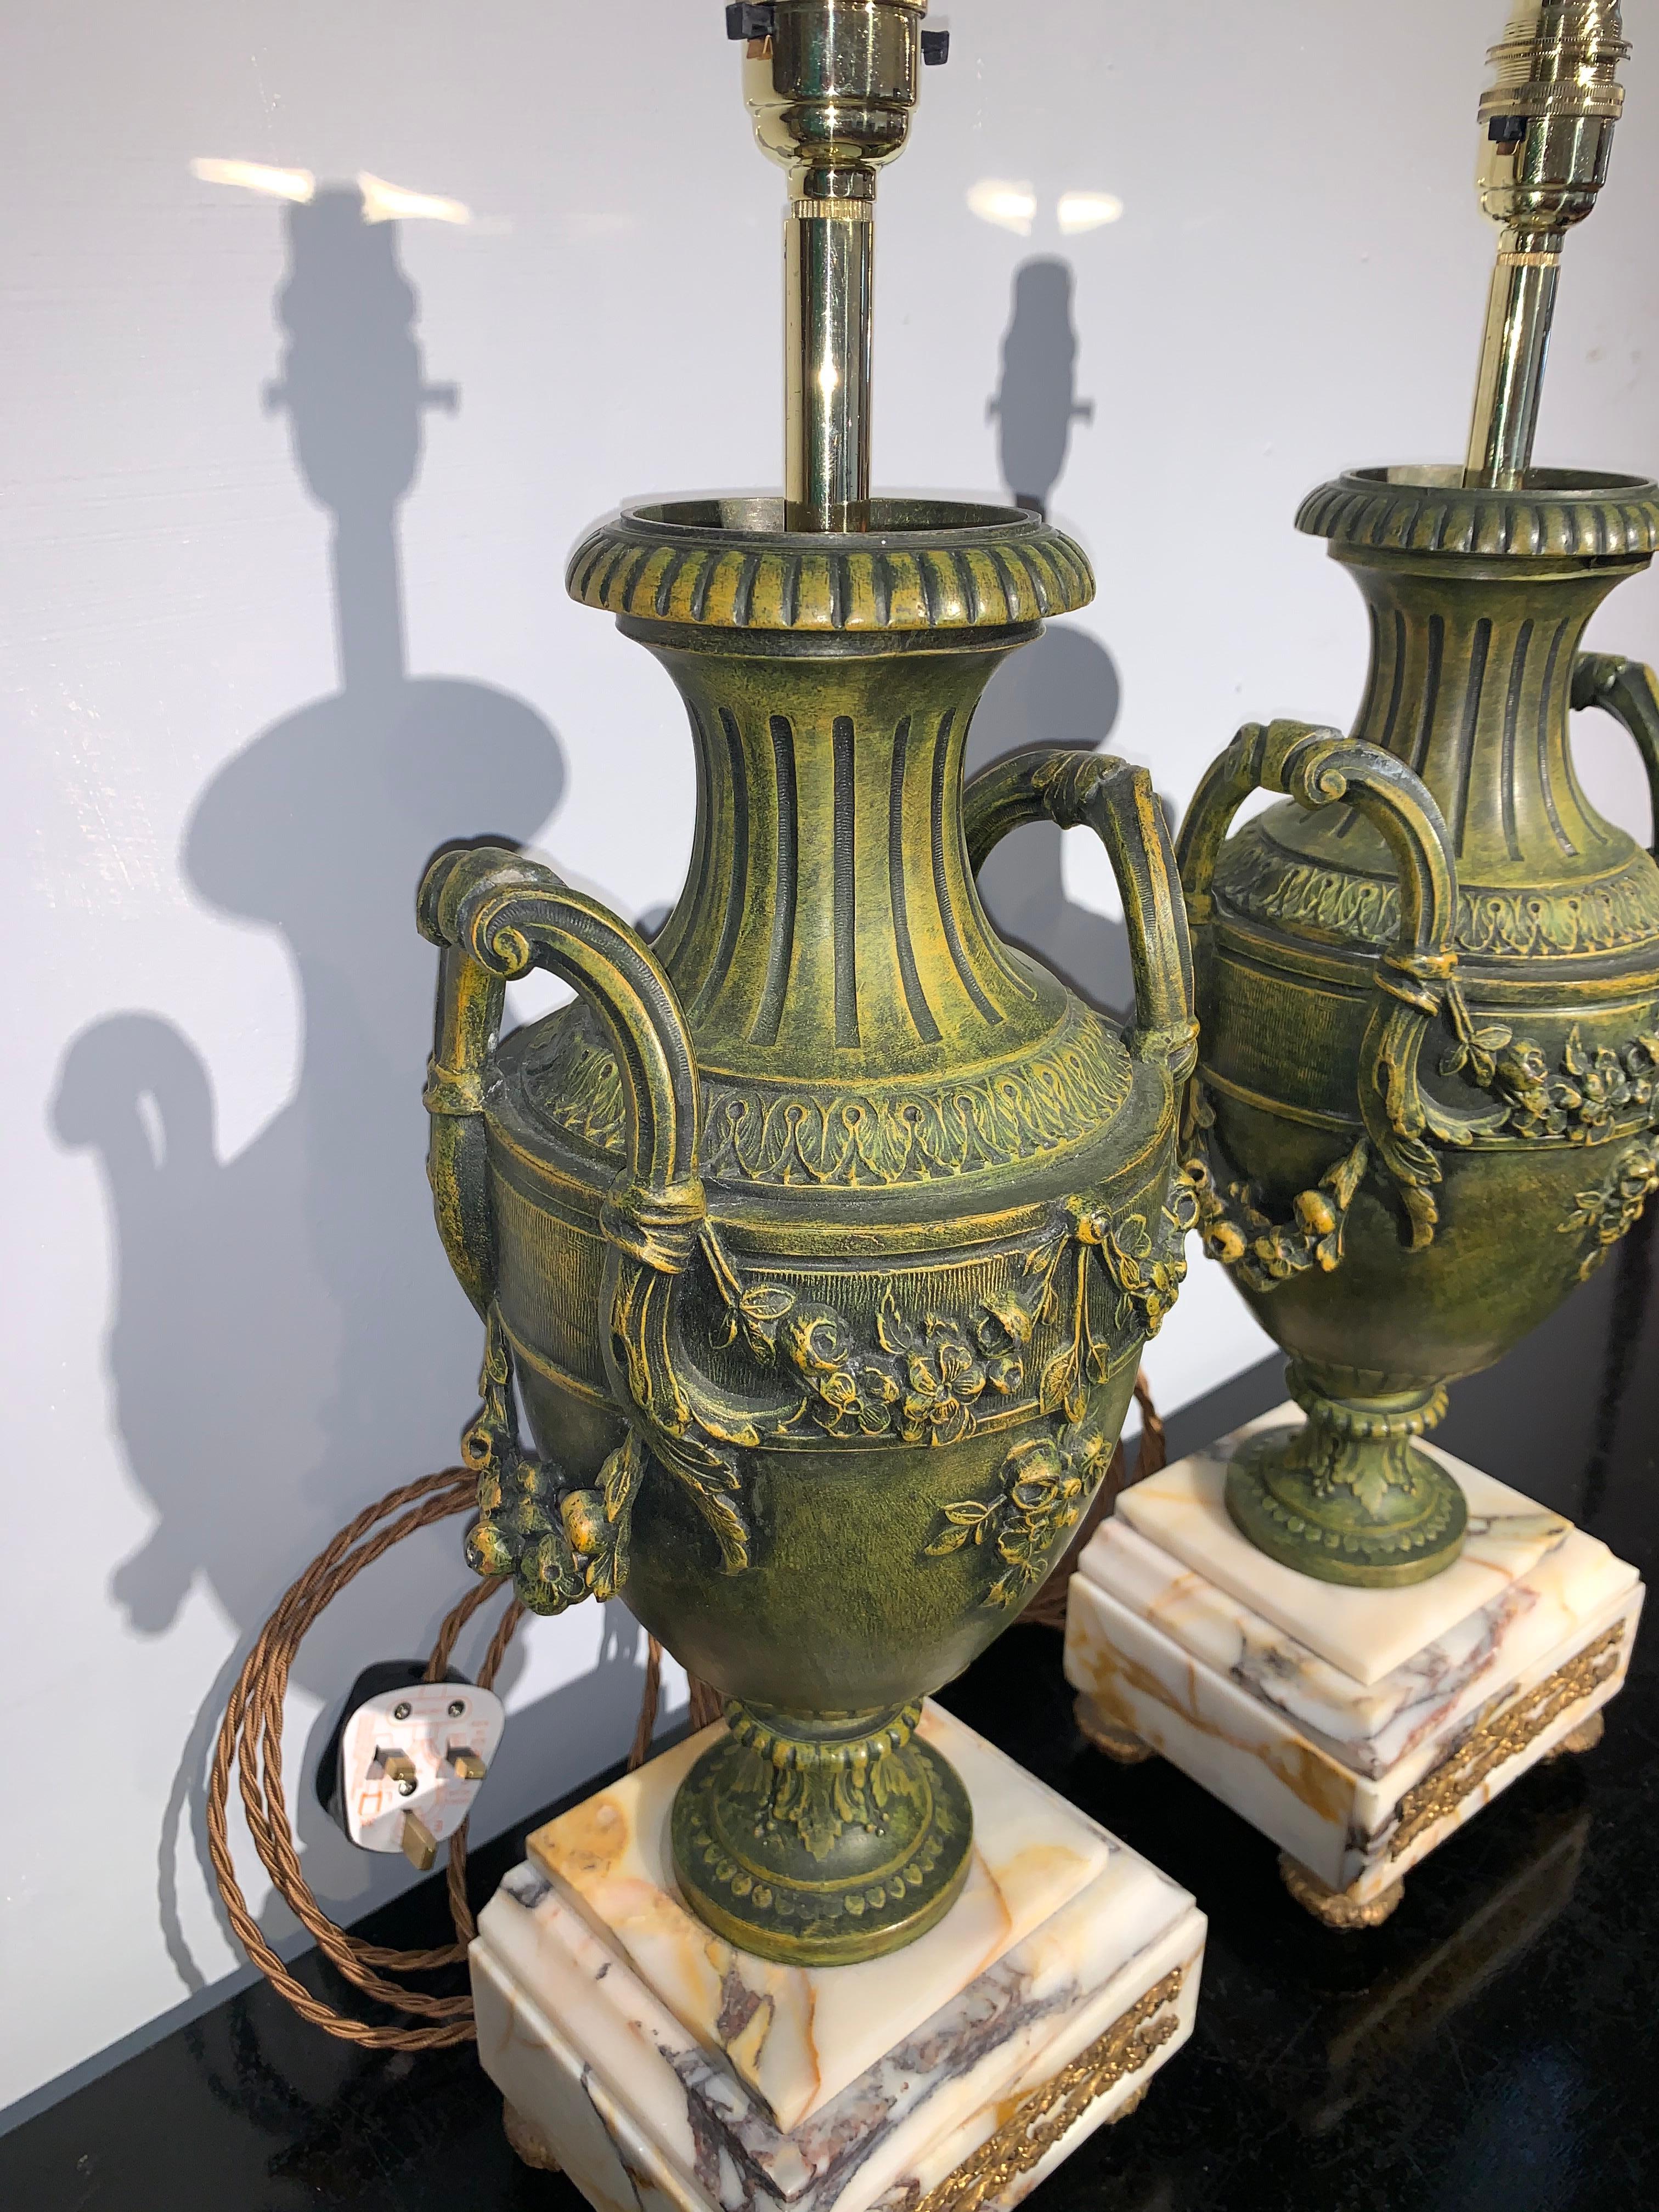 Great pair of late 19th century Spelter and marble table lamps 

French dating to circa 1880s

Measures: Height 21 inches
Width 8 inches
Depth 8 inches.